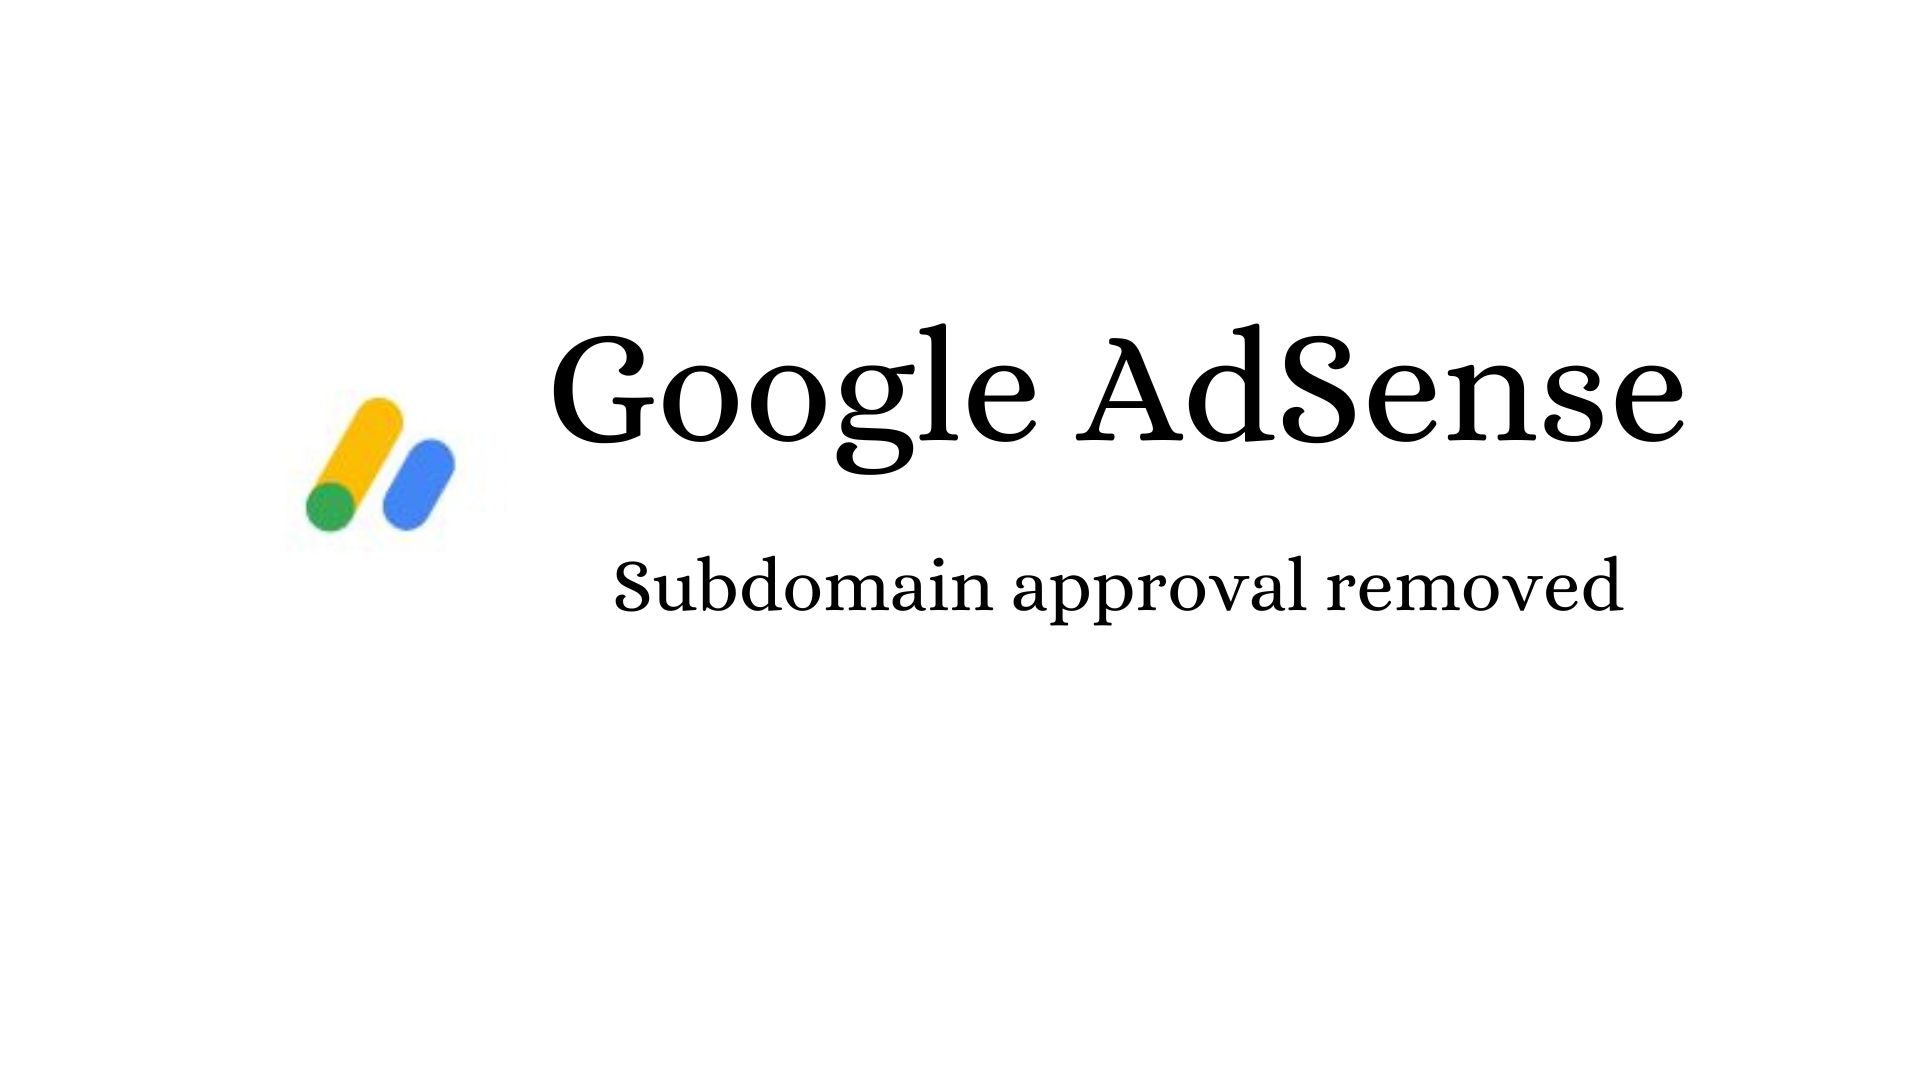 Google AdSense subdomain approval removed